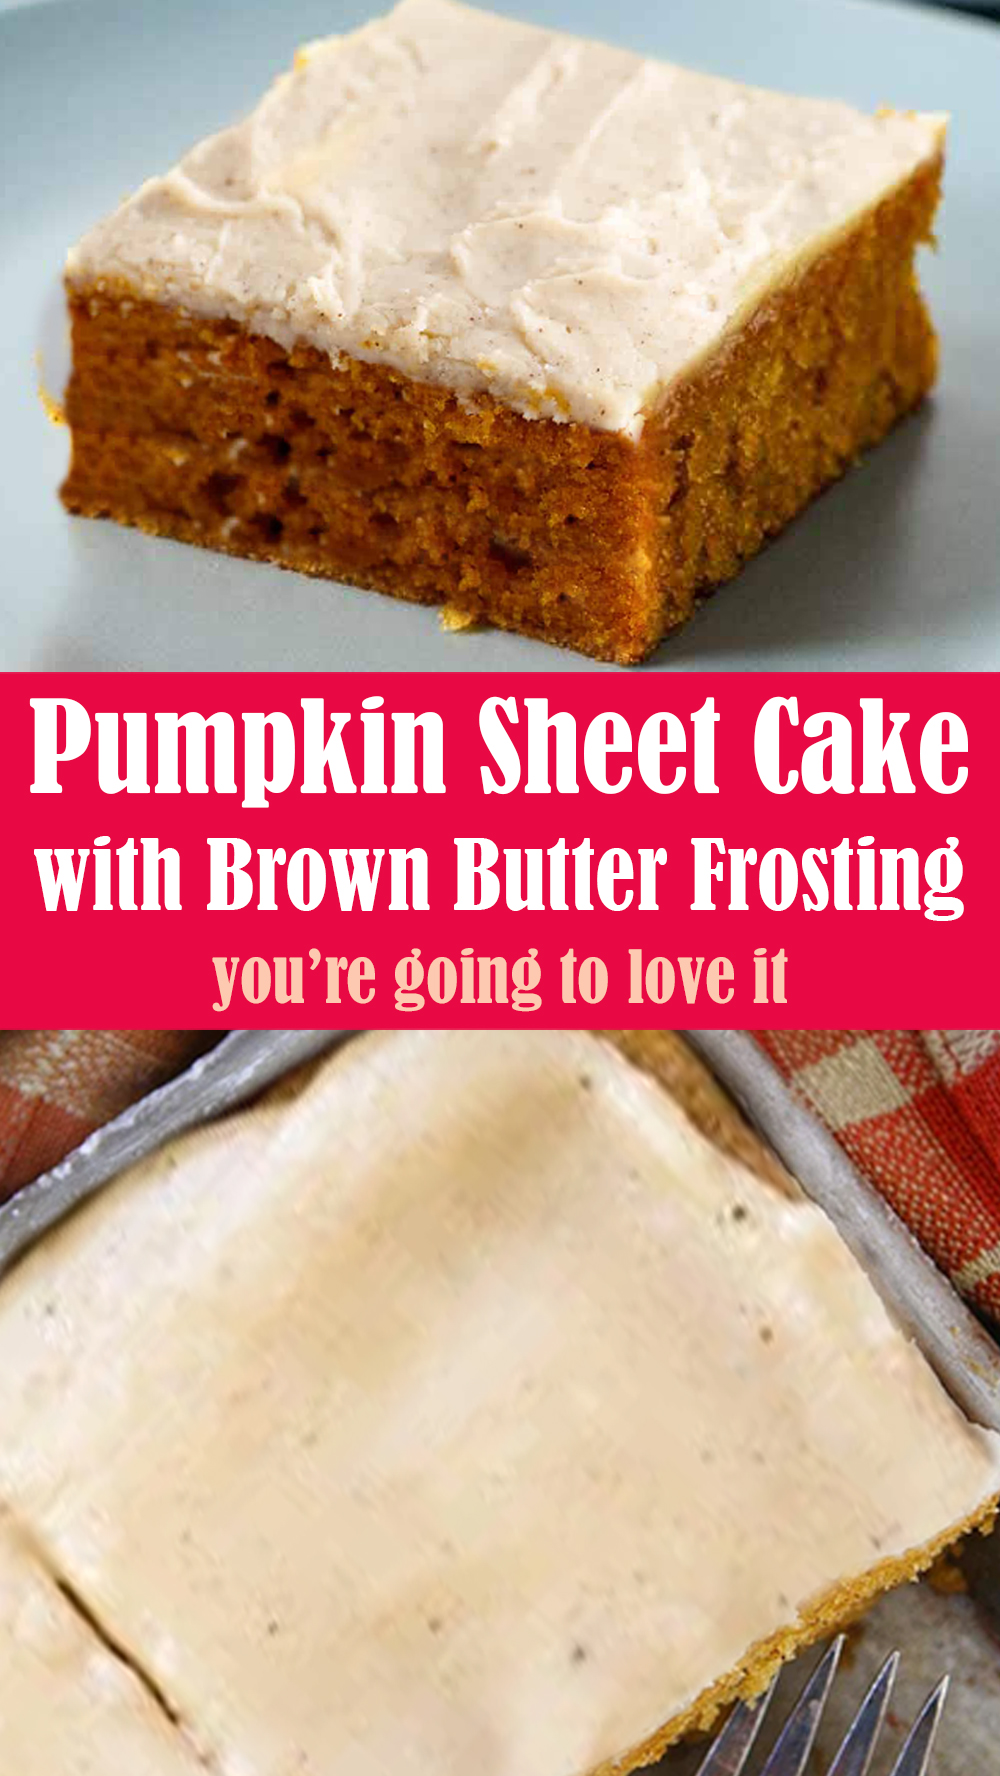 Pumpkin Sheet Cake with Brown Butter Frosting Recipe